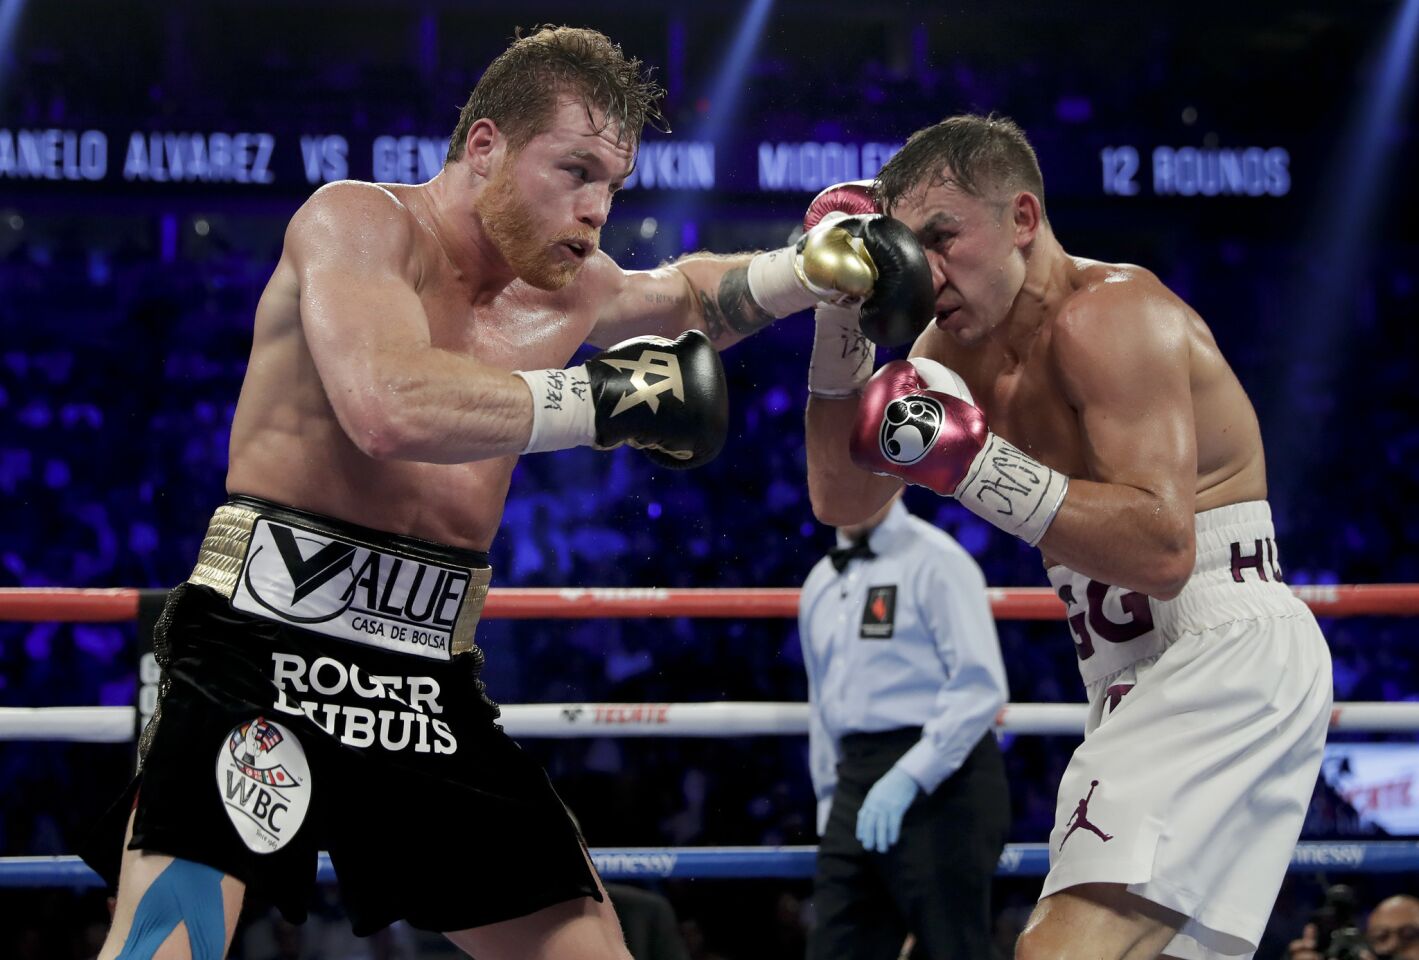 Canelo Alvarez, left, and Gennady Golovkin trade punches in the sixth round during a middleweight title boxing match, Saturday, Sept. 15, 2018, in Las Vegas.